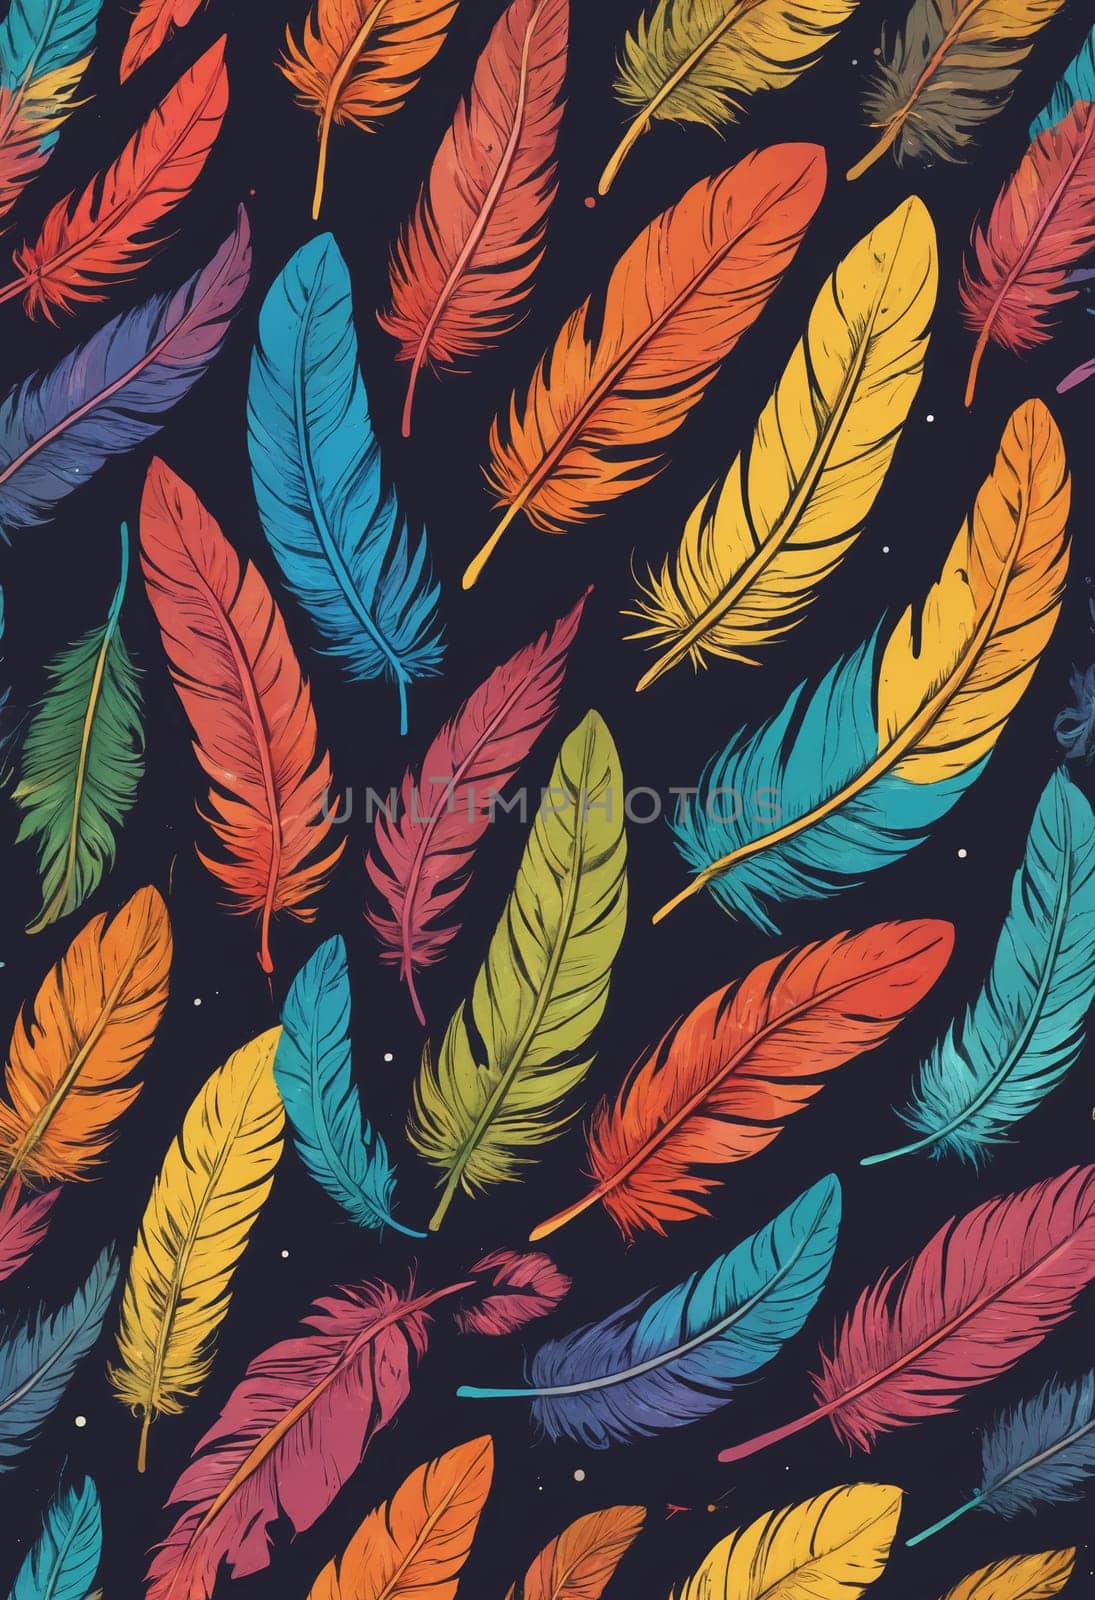 Feather Ensemble: A Digital Illustration of Quills by Andre1ns